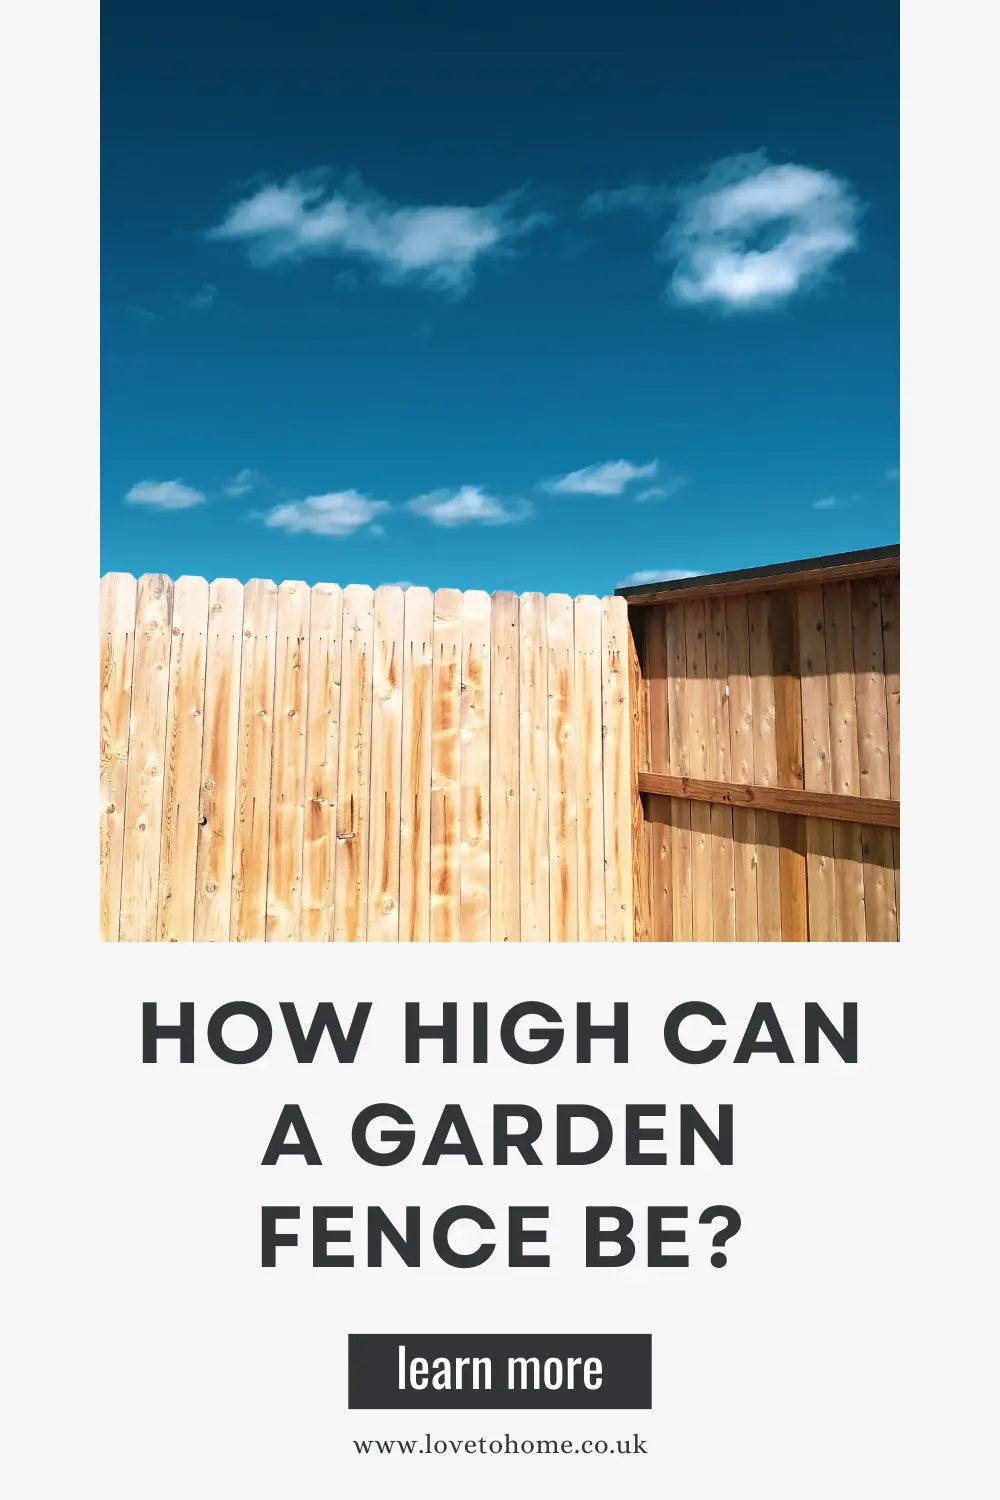 How High Can a Garden Fence Be?